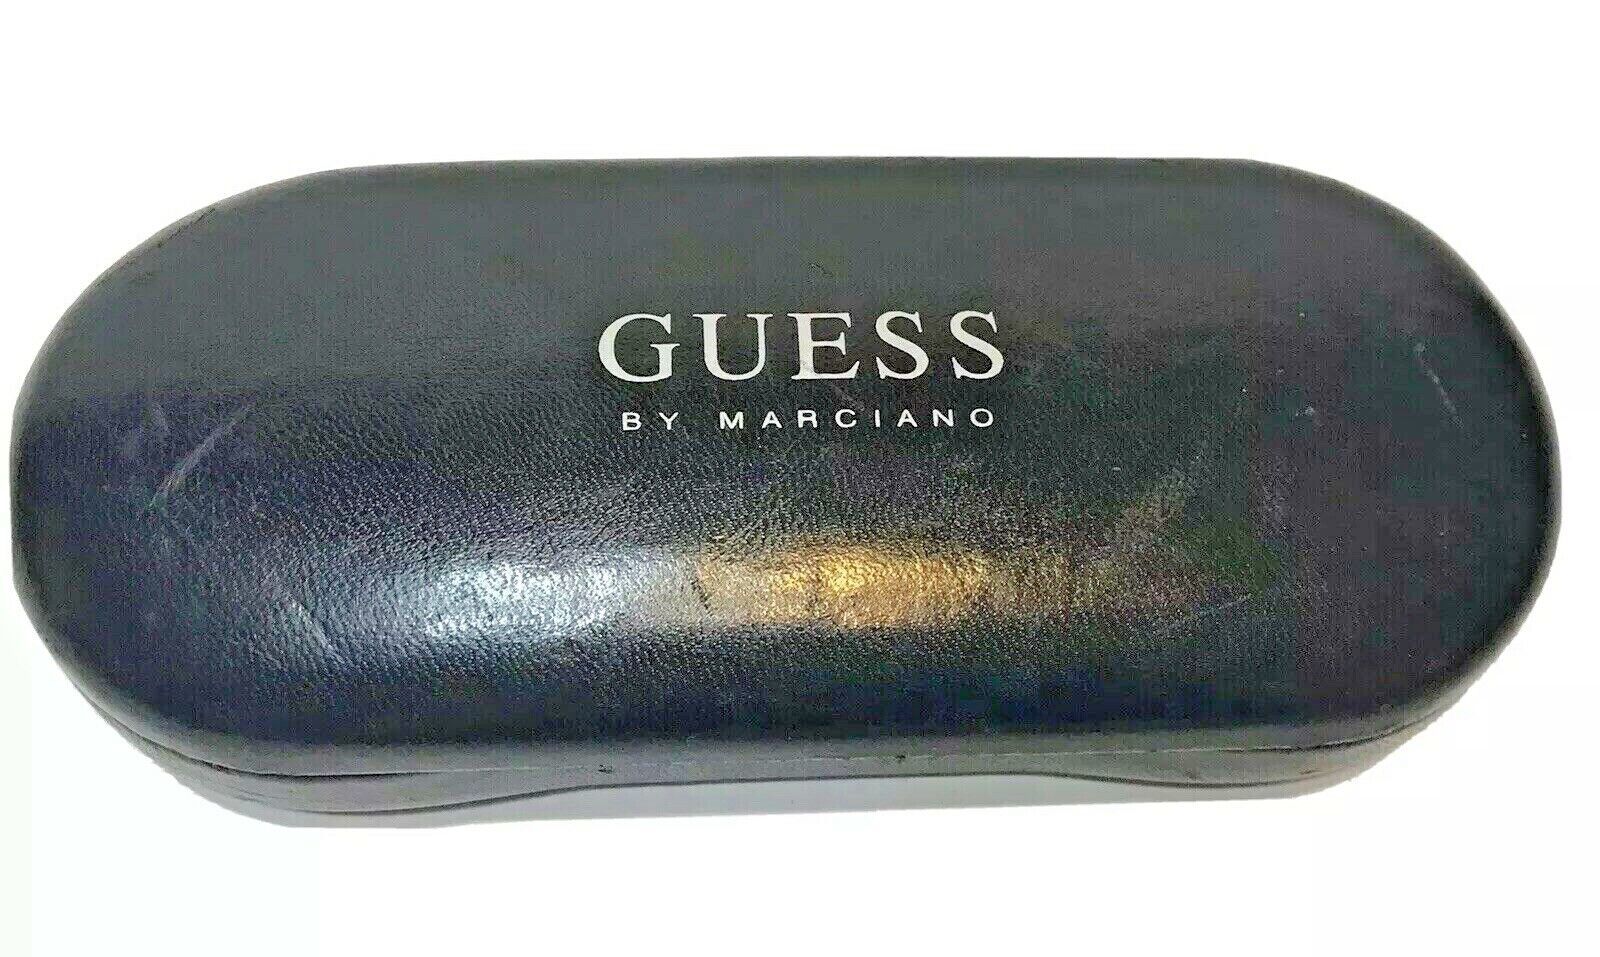 Guess by Marciano Hard Clamshell Glasses Case Black Authentic  - $8.64